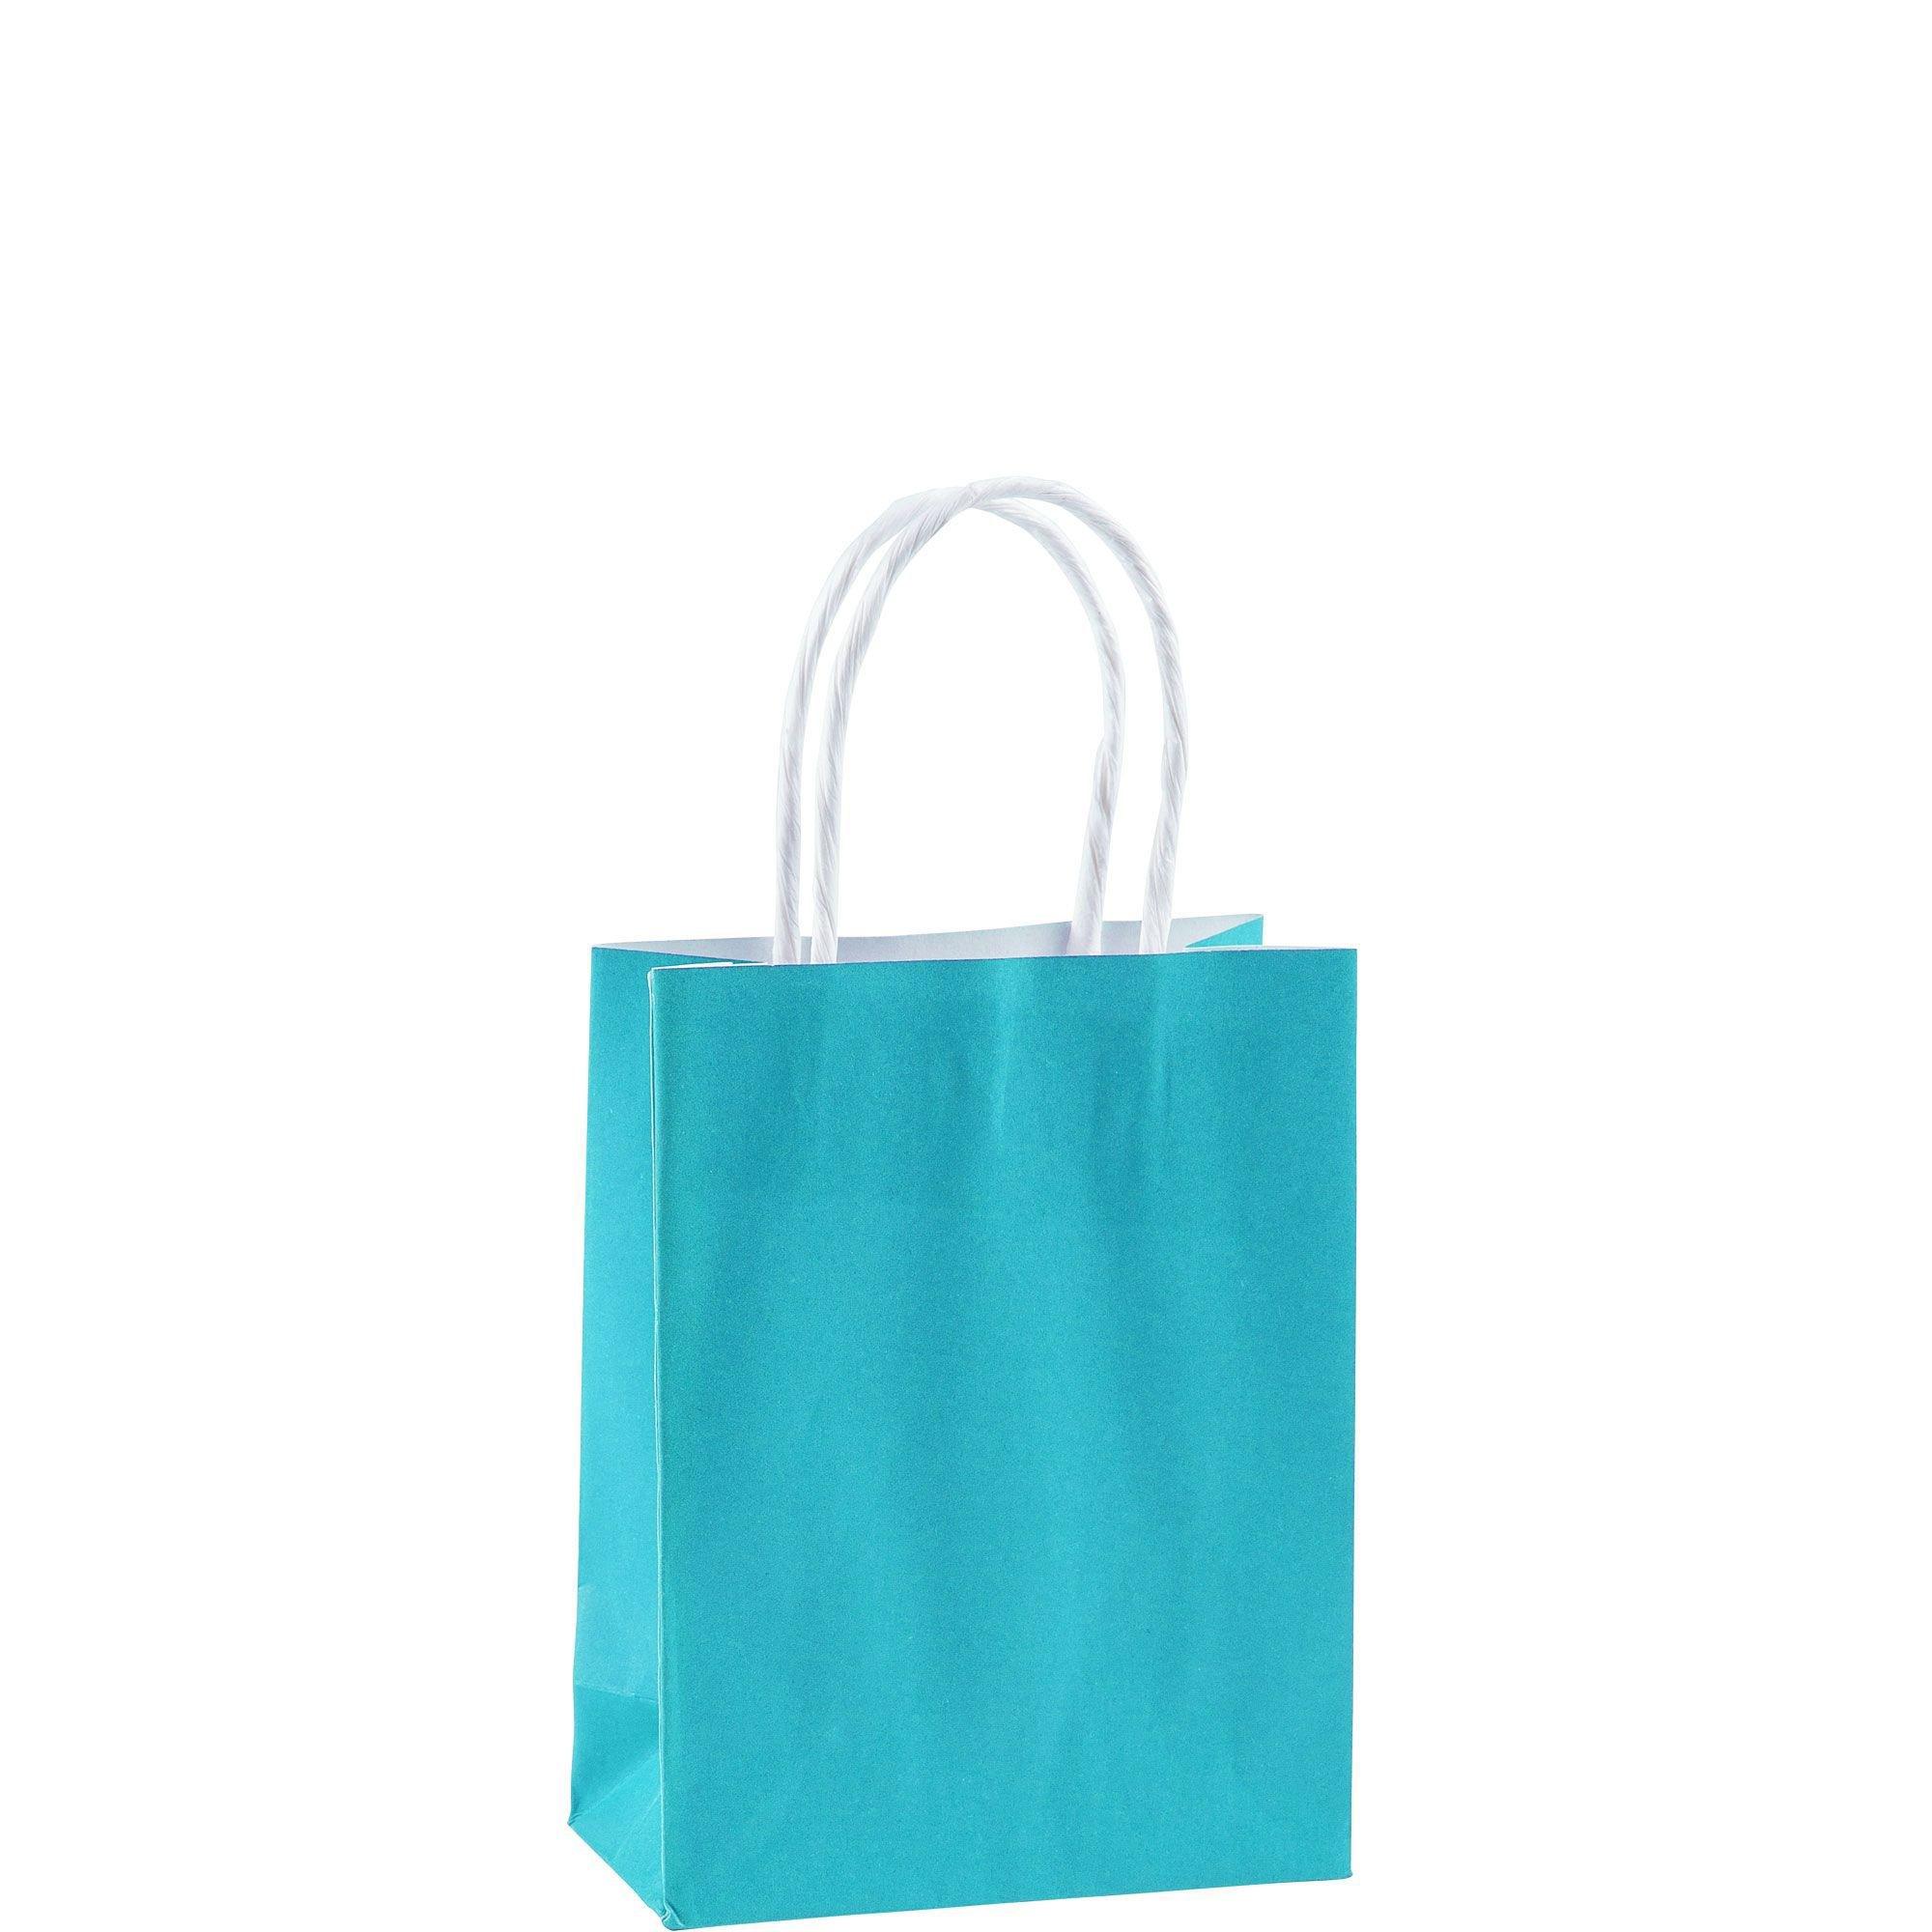 Black & Blue Paper Shopping Bags, For Packaging, Capacity: 2kg